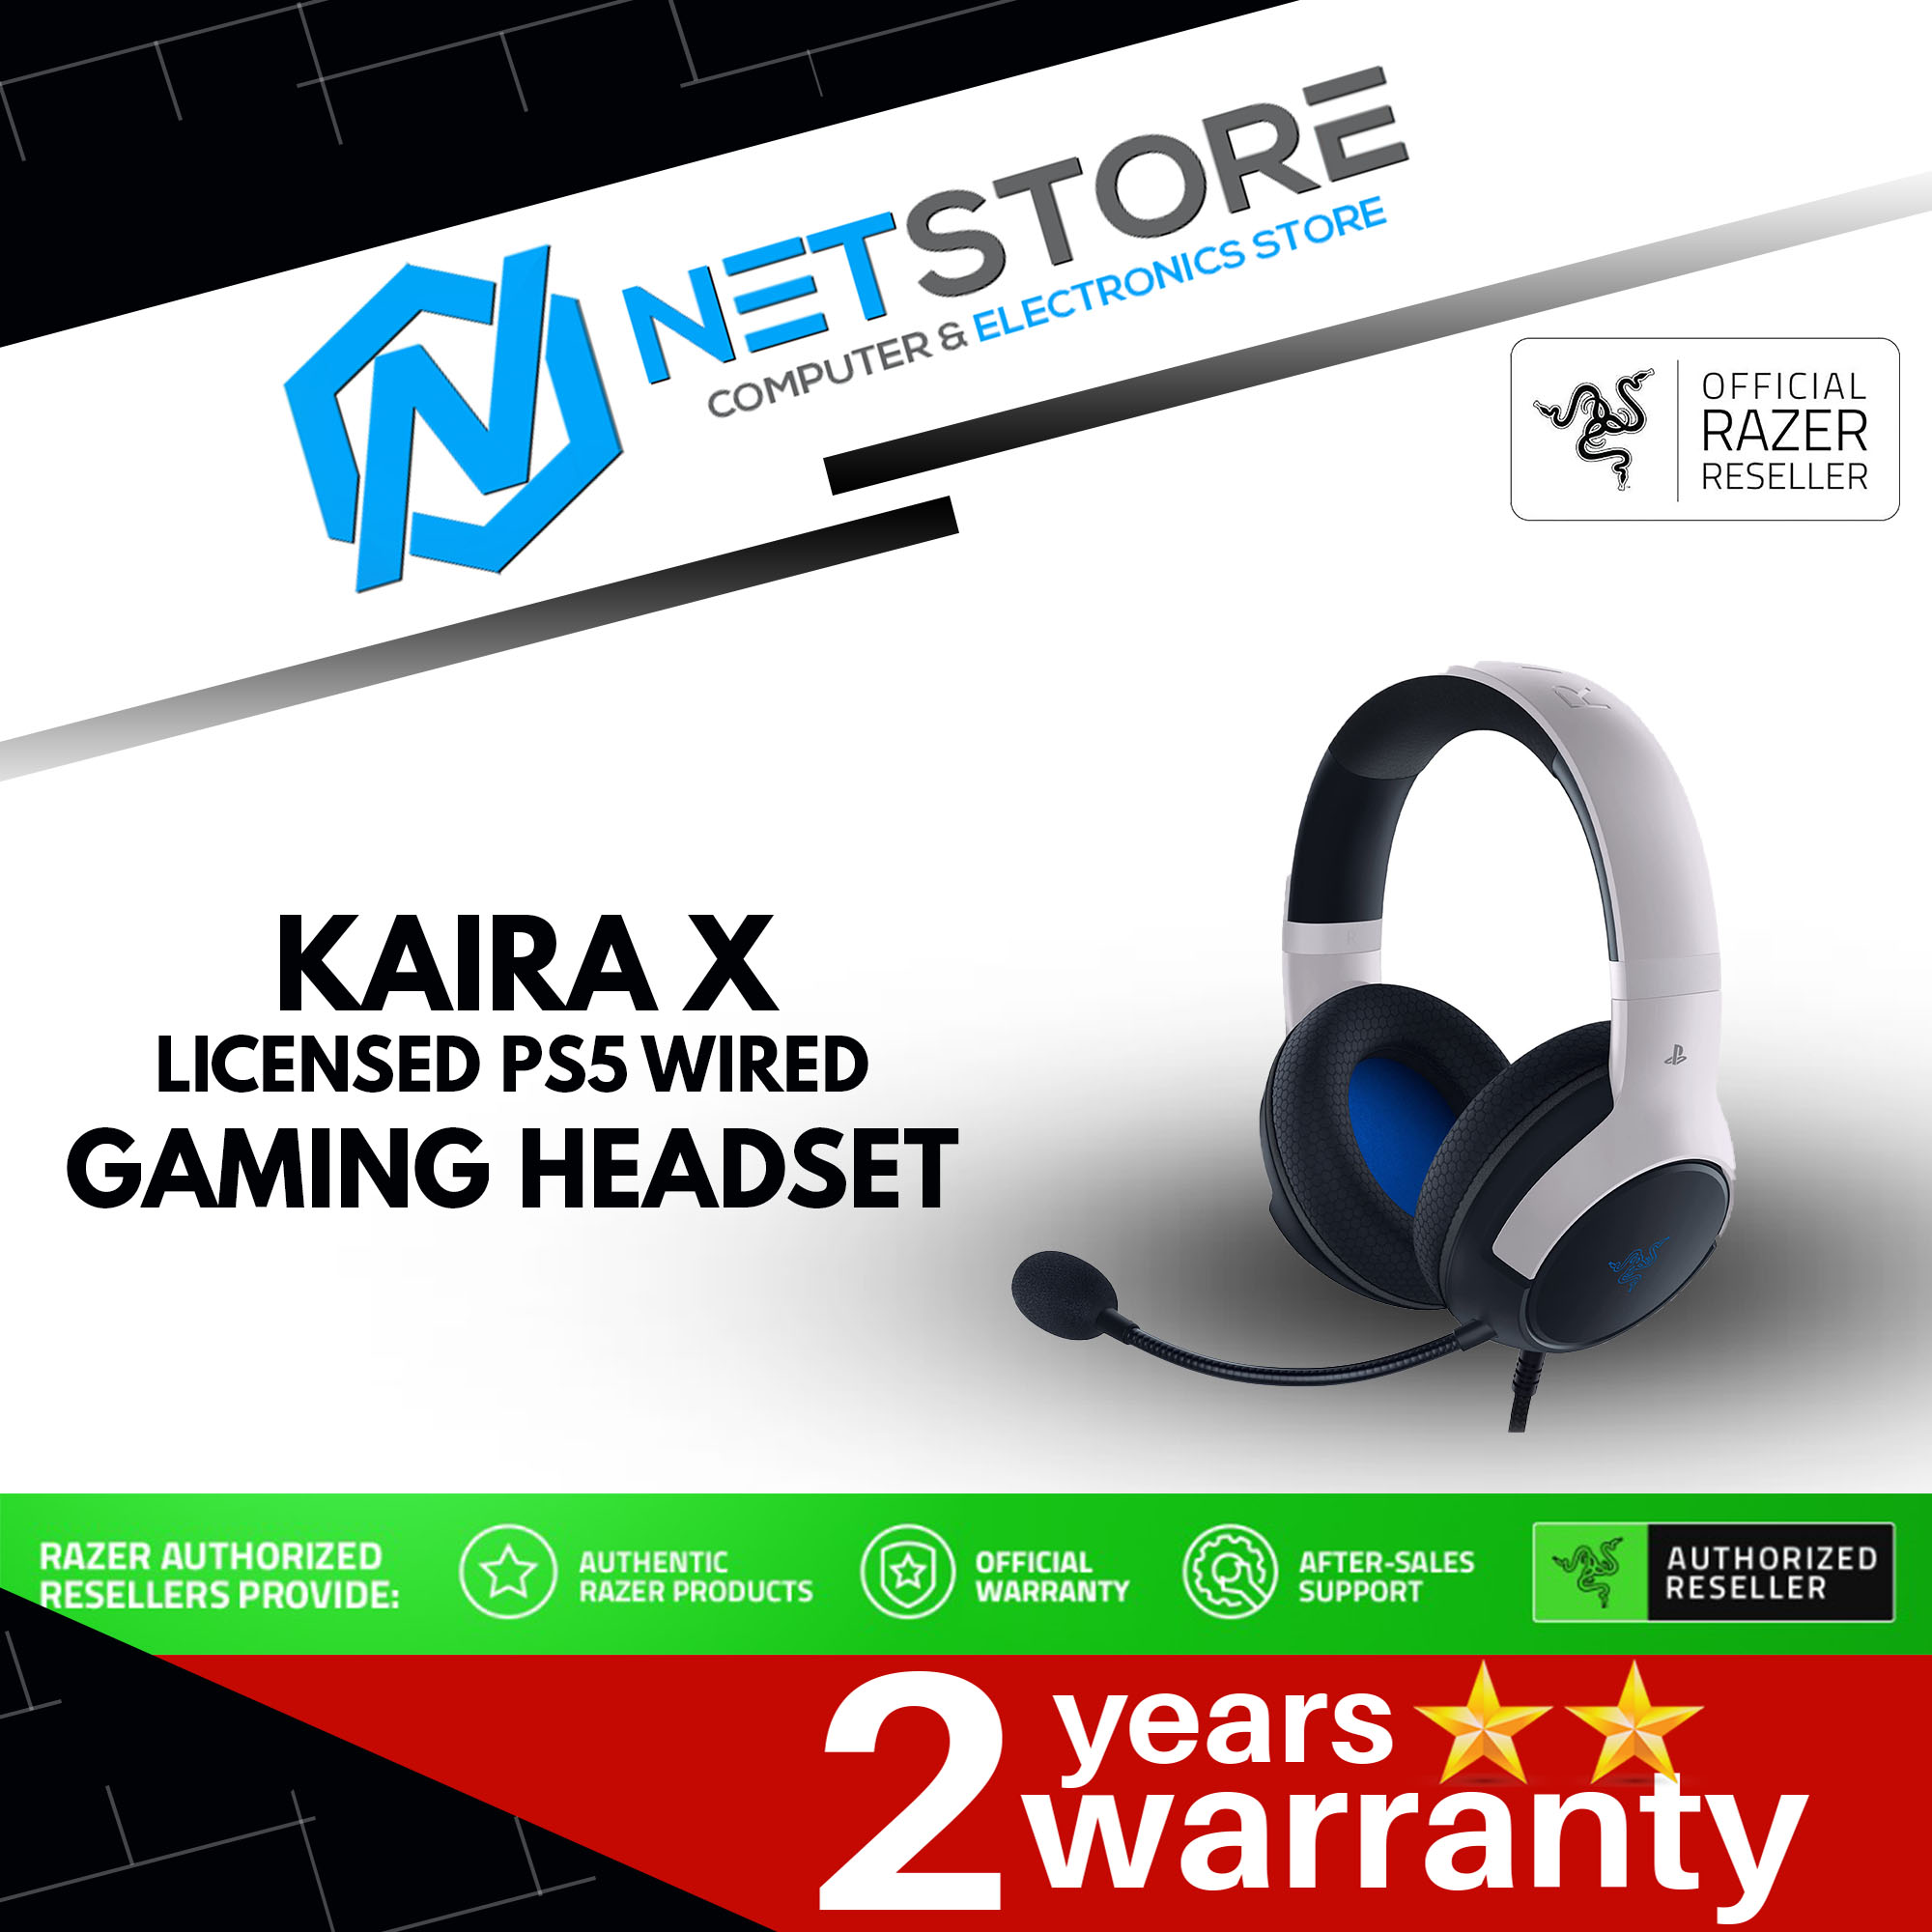 RAZER KAIRA X - LICENSED PS5 WIRED GAMING HEADSET - RZ04-03970700-R3A1